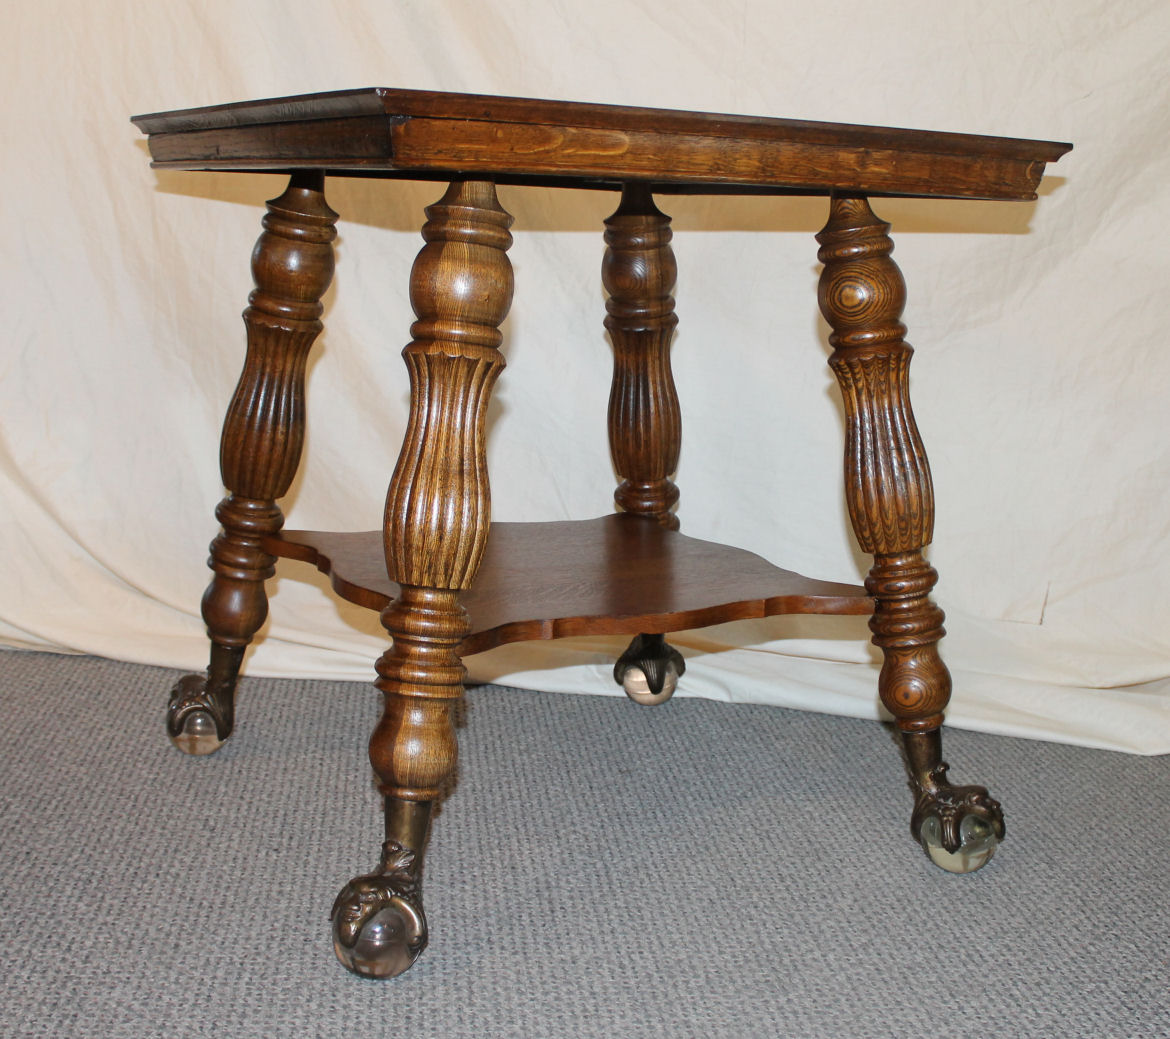 Bargain John's Antiques | Oak Lamp Table with large Claw ...
